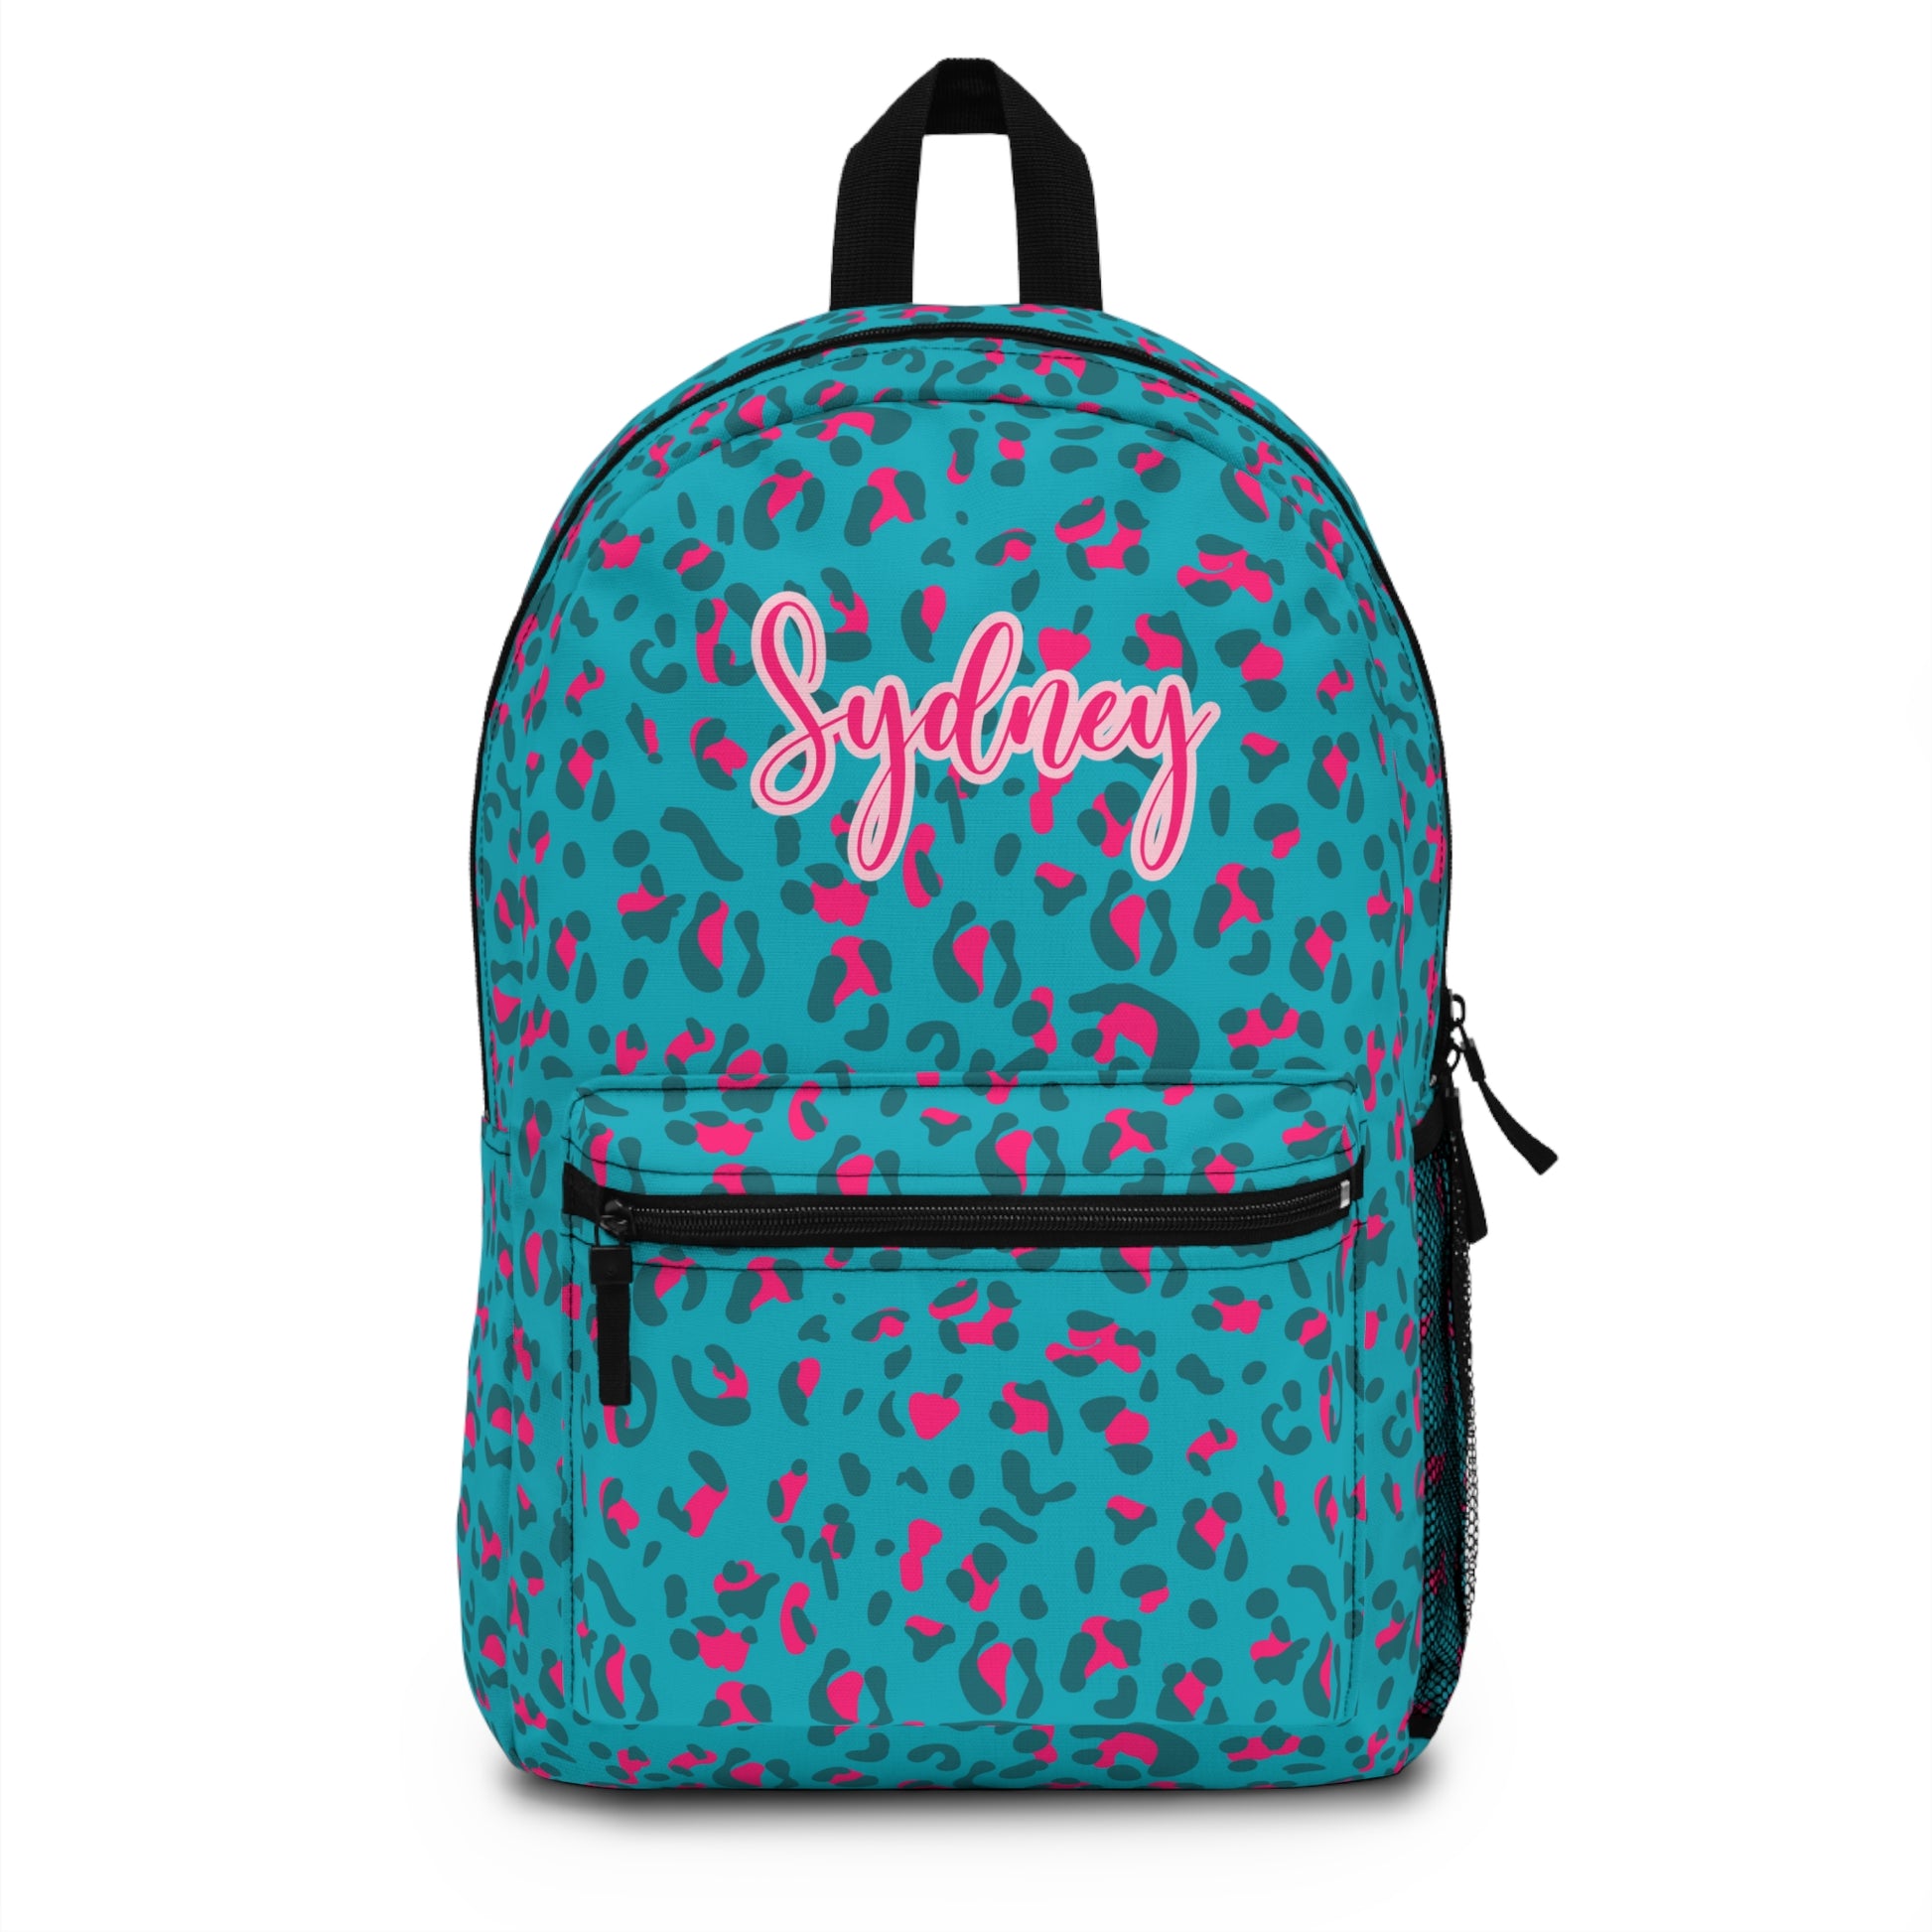 blue and hot pink leopard print backpack personalized with girls name for back to school